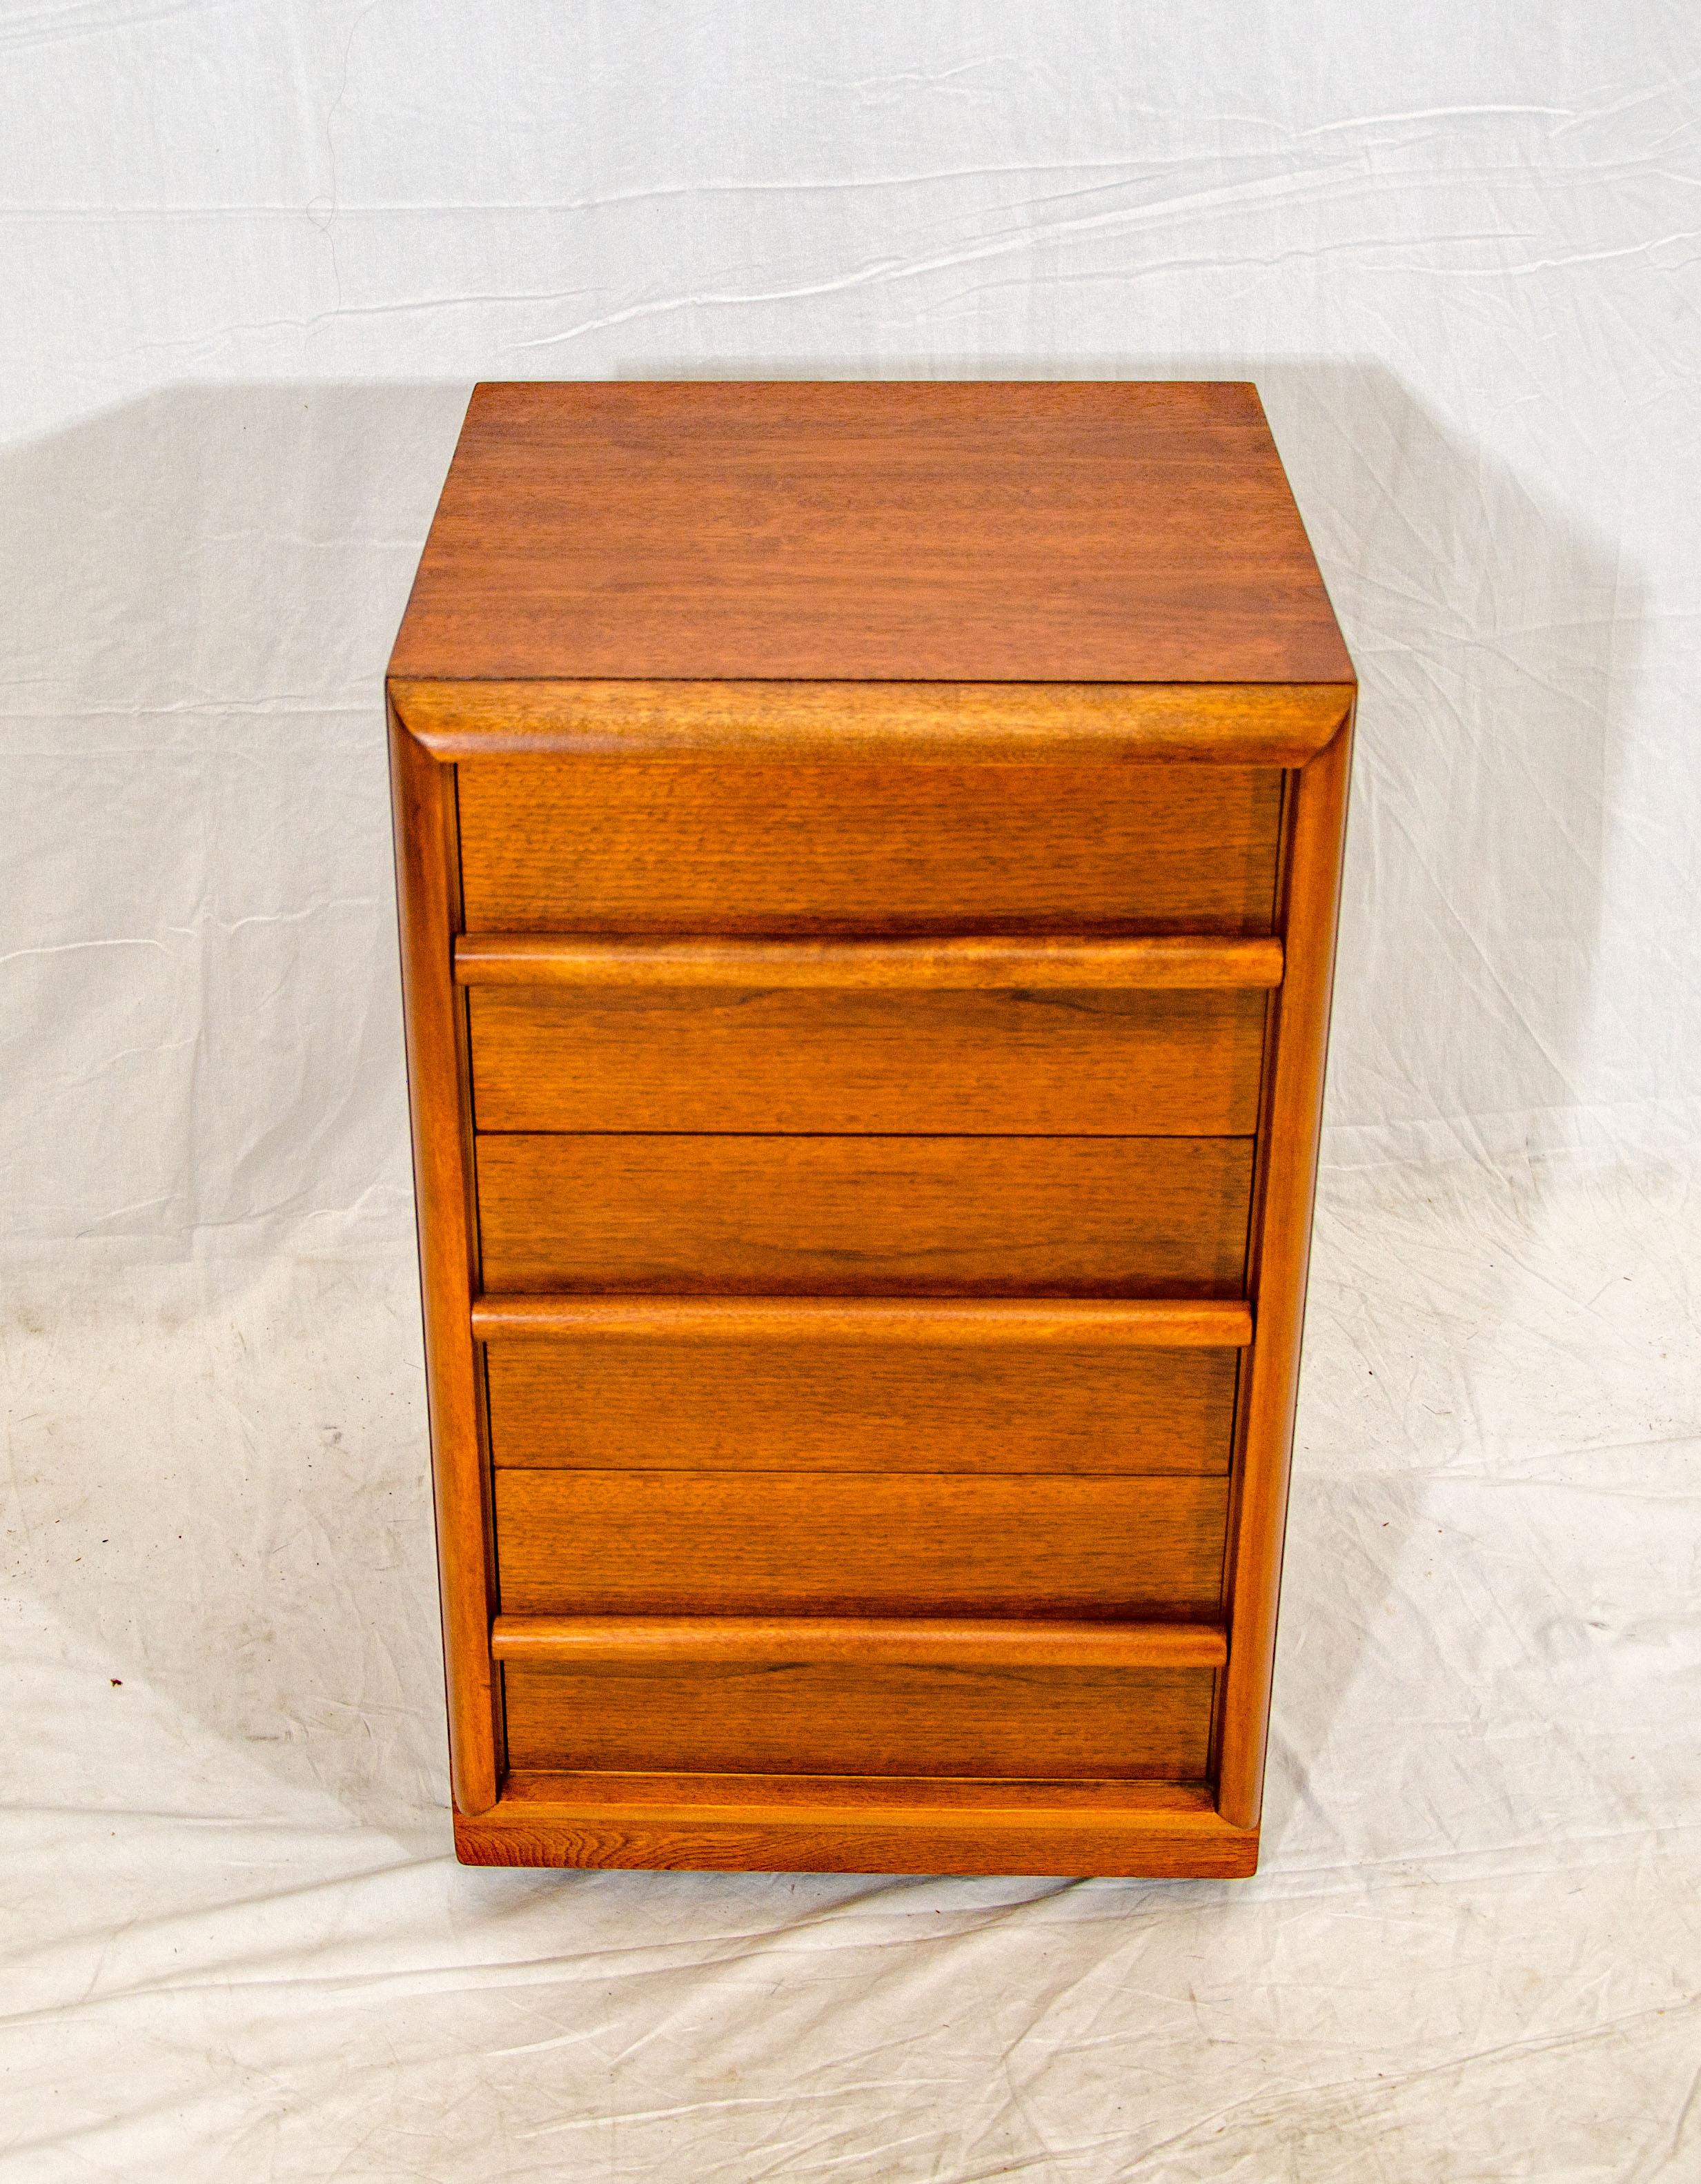 This nice three-drawer nightstand is a good small storage chest as well. The interior drawer space is 15 1/4